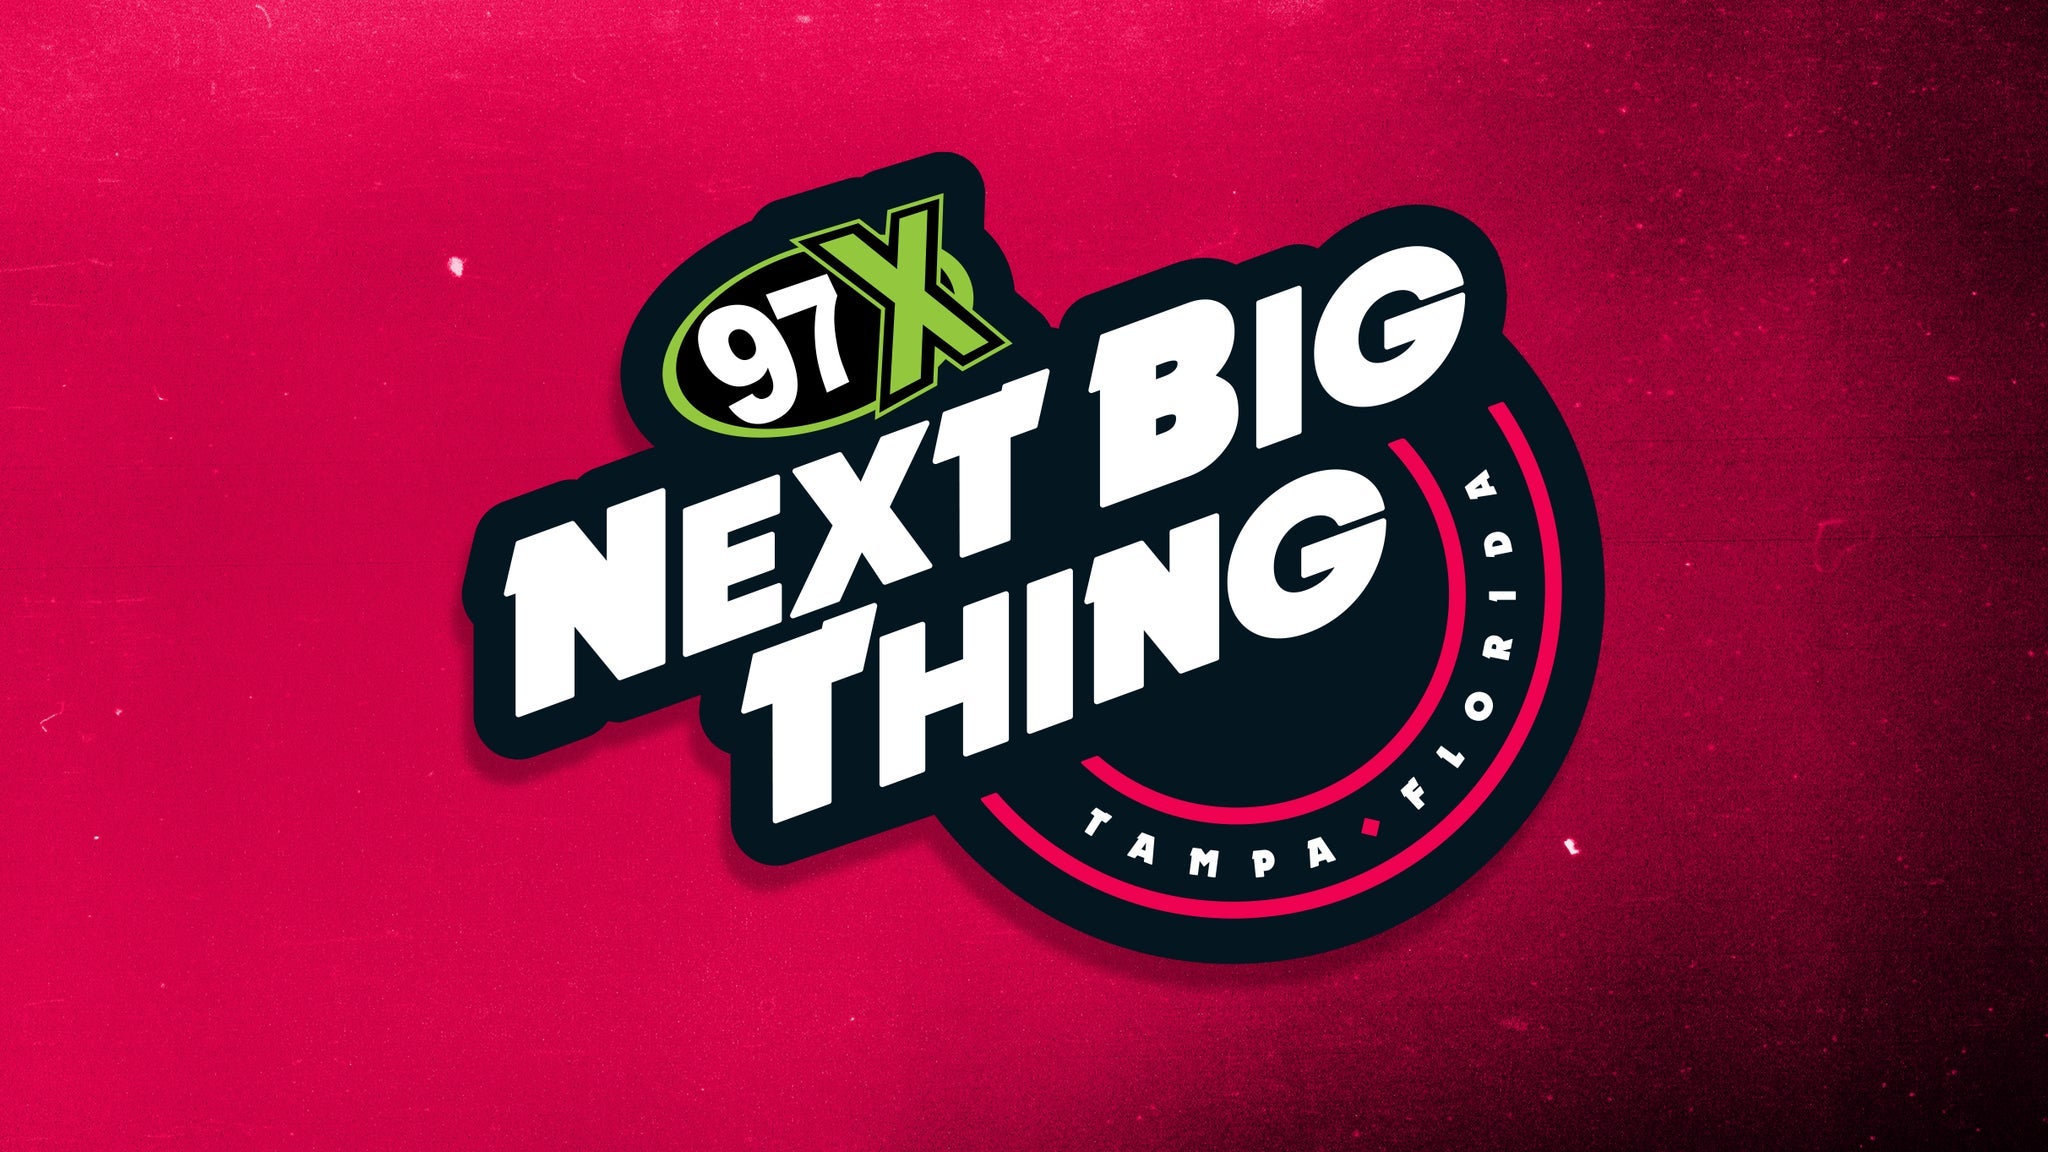 97x Next Big Thing: 2 Day Pass in Tampa promo photo for Early Access presale offer code